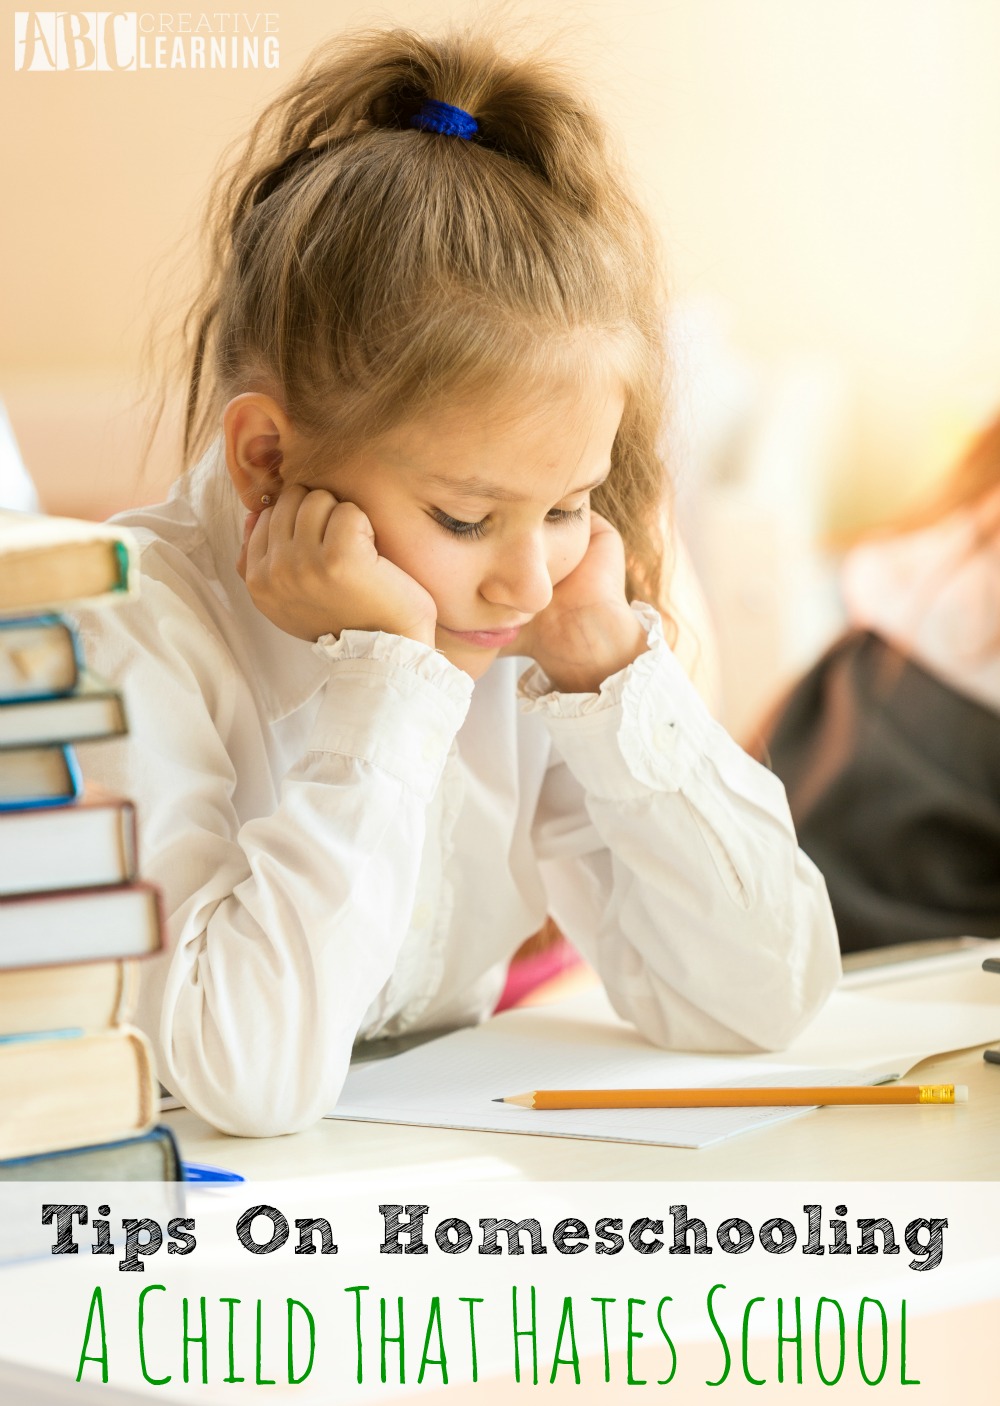 Tips On Homeschooling A Child That Hates School